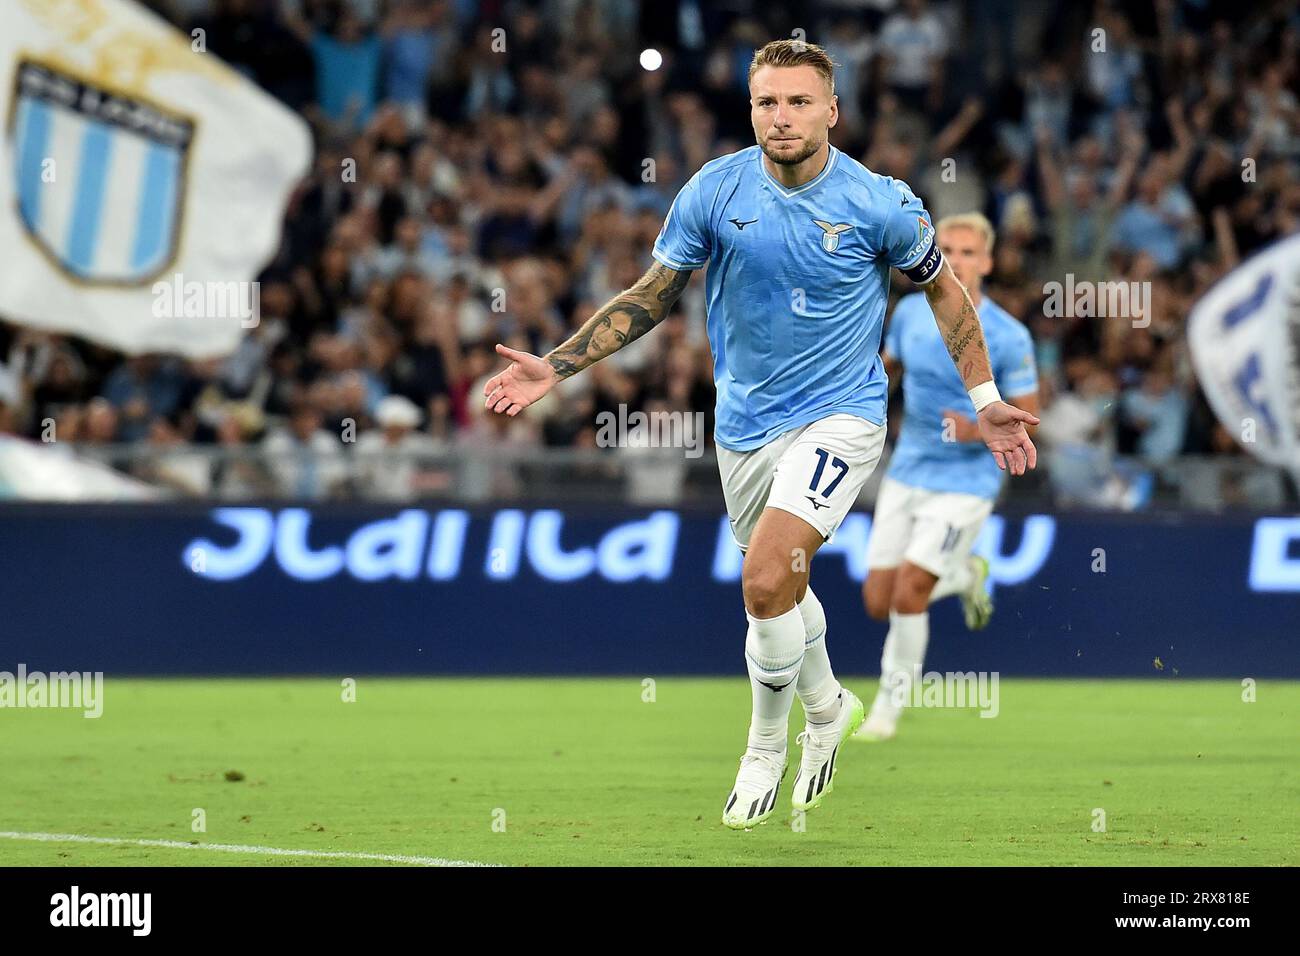 Rome, Italy. 23rd Sep, 2023. Ciro Immobile of SS Lazio celebrates after scoring the goal on penaly of 1-0 during the Serie A football match between SS Lazio and AC Monza at Olimpico stadium in Rome (Italy), September 23rd, 2023. Credit: Insidefoto di andrea staccioli/Alamy Live News Stock Photo